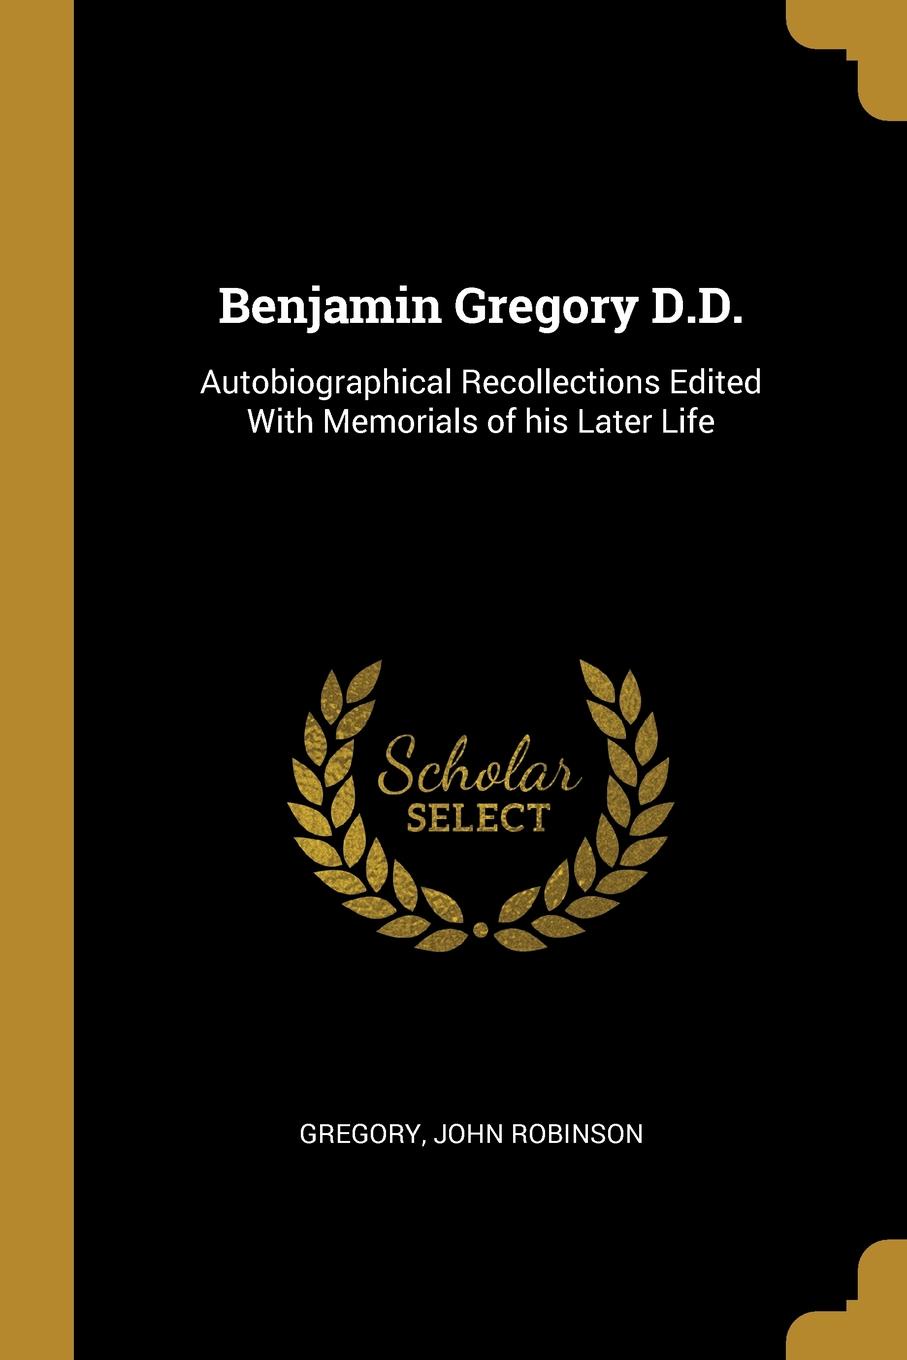 Benjamin Gregory D.D. Autobiographical Recollections Edited With Memorials of his Later Life